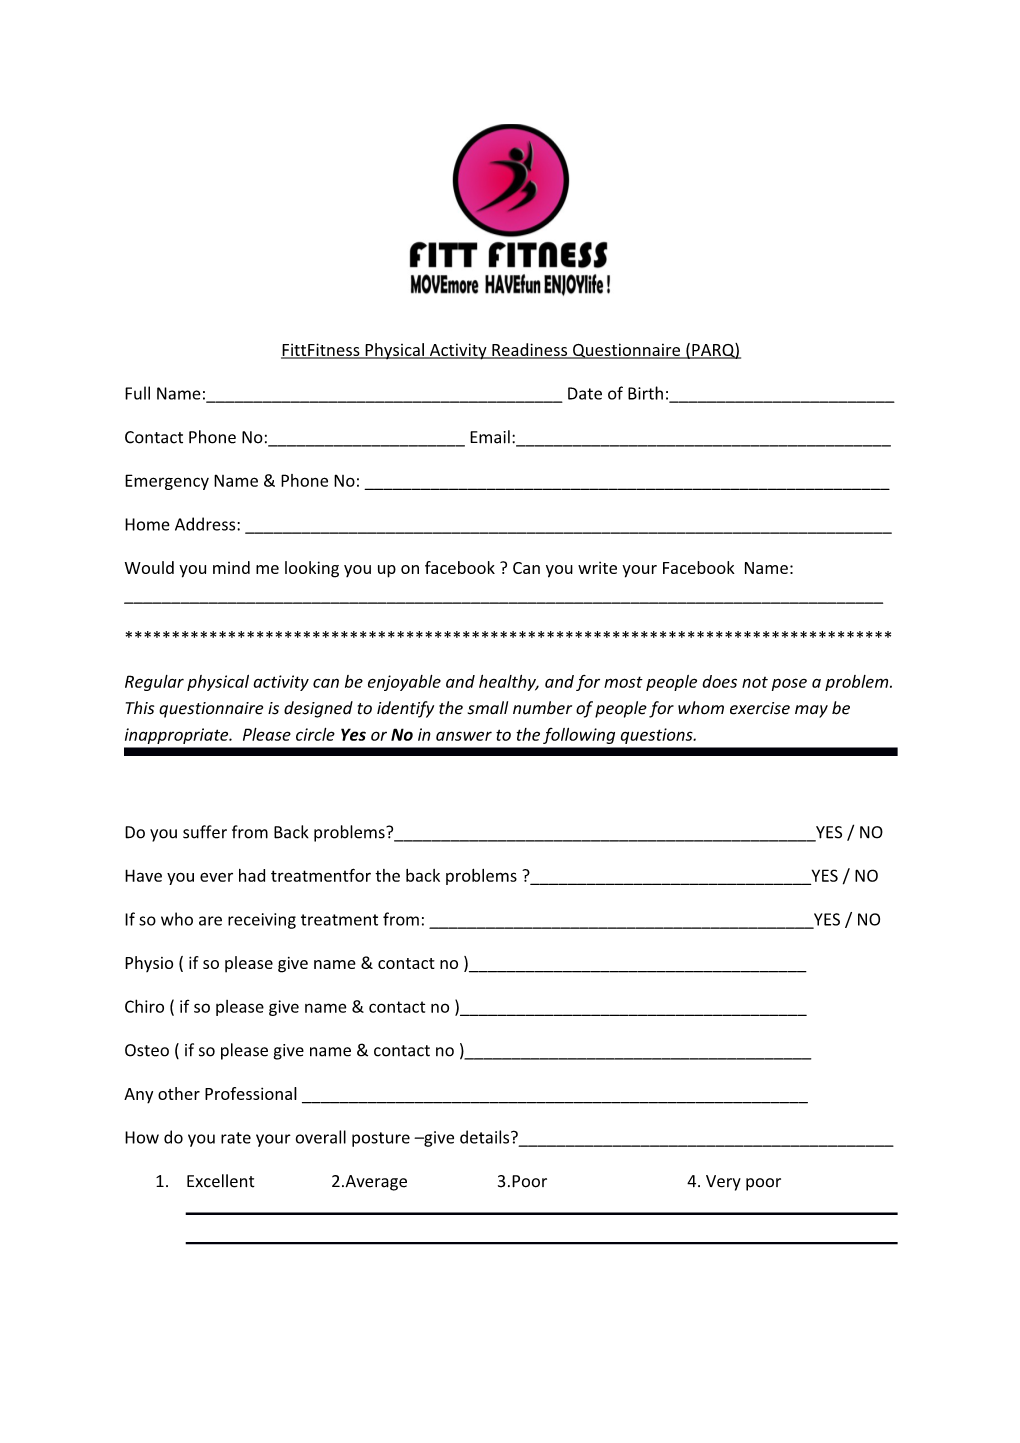 Fittfitness Physical Activity Readiness Questionnaire (PARQ)